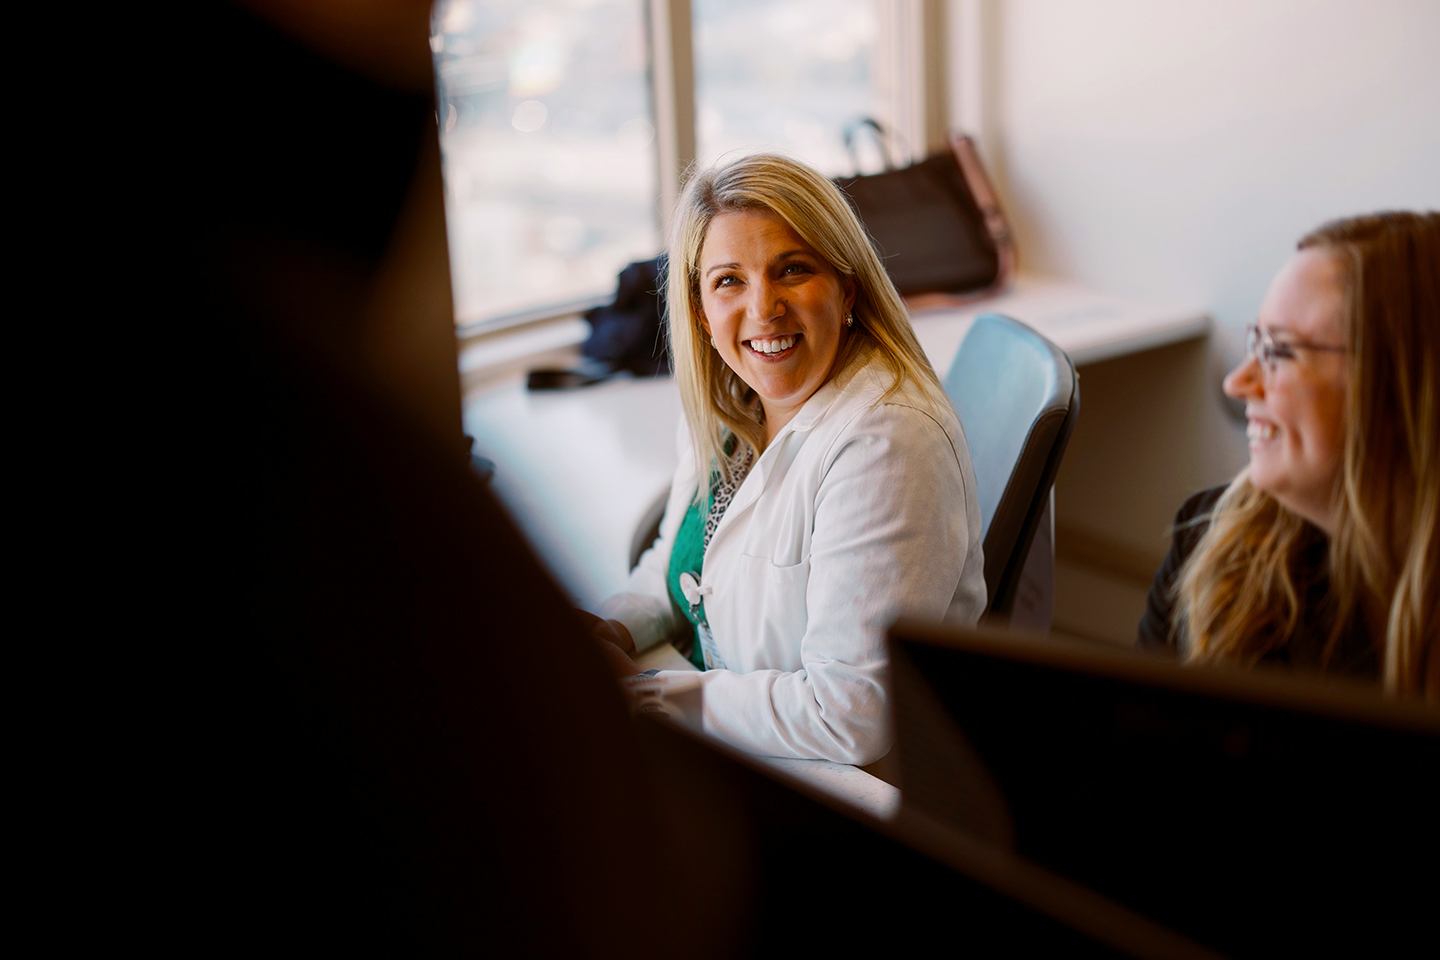 An image of pharmacist Olivia Morgan smiling from behind her desk. She is seated and is wearing a white lab coat.